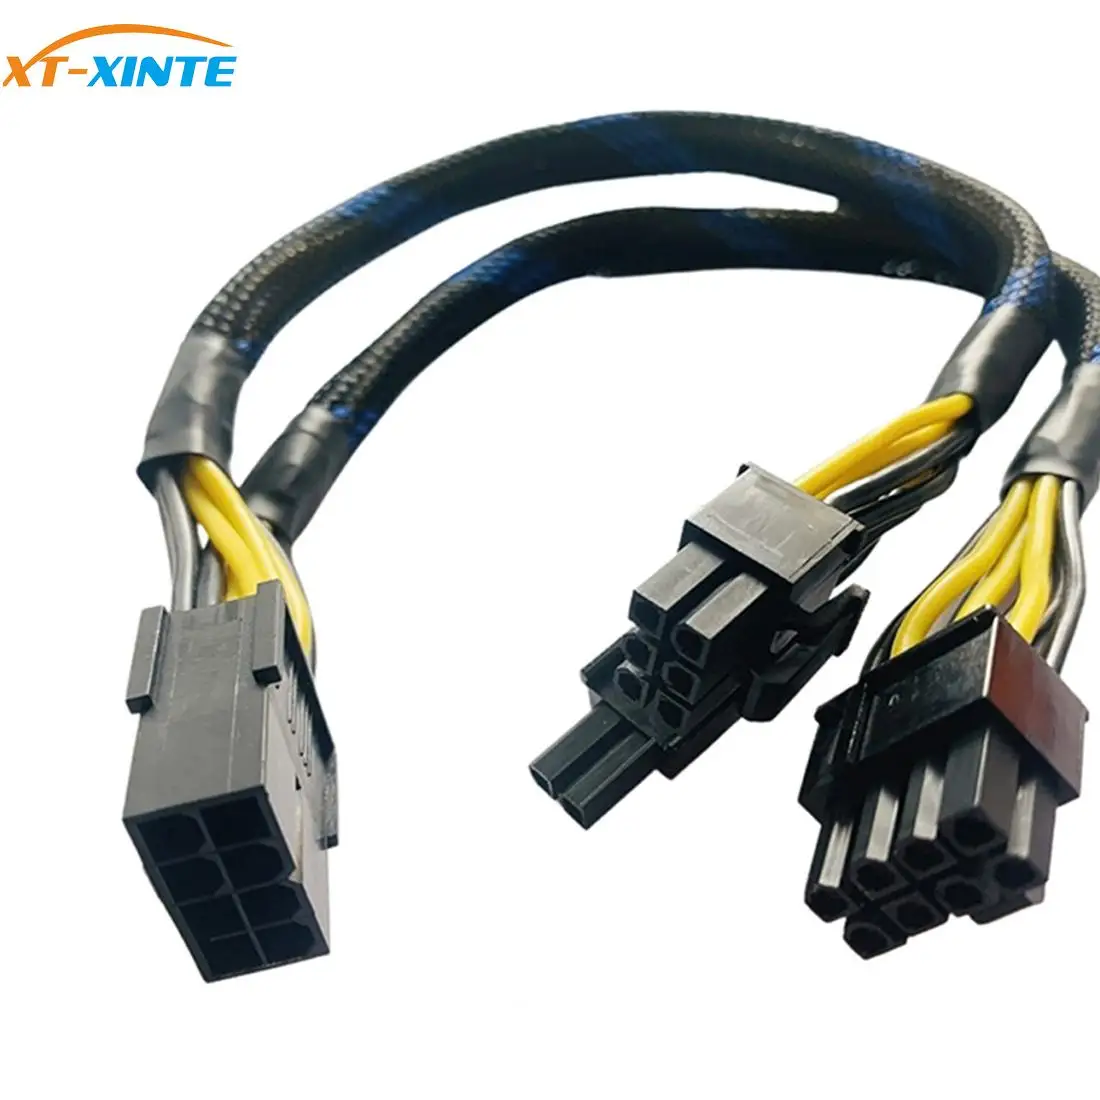 

8pin Female to Dual 8pin(6+2) Male Power Adapter Cable 20cm/30cm Graphics Card Splitter Cable PCI-E GPU Power Supply Cable 18AWG